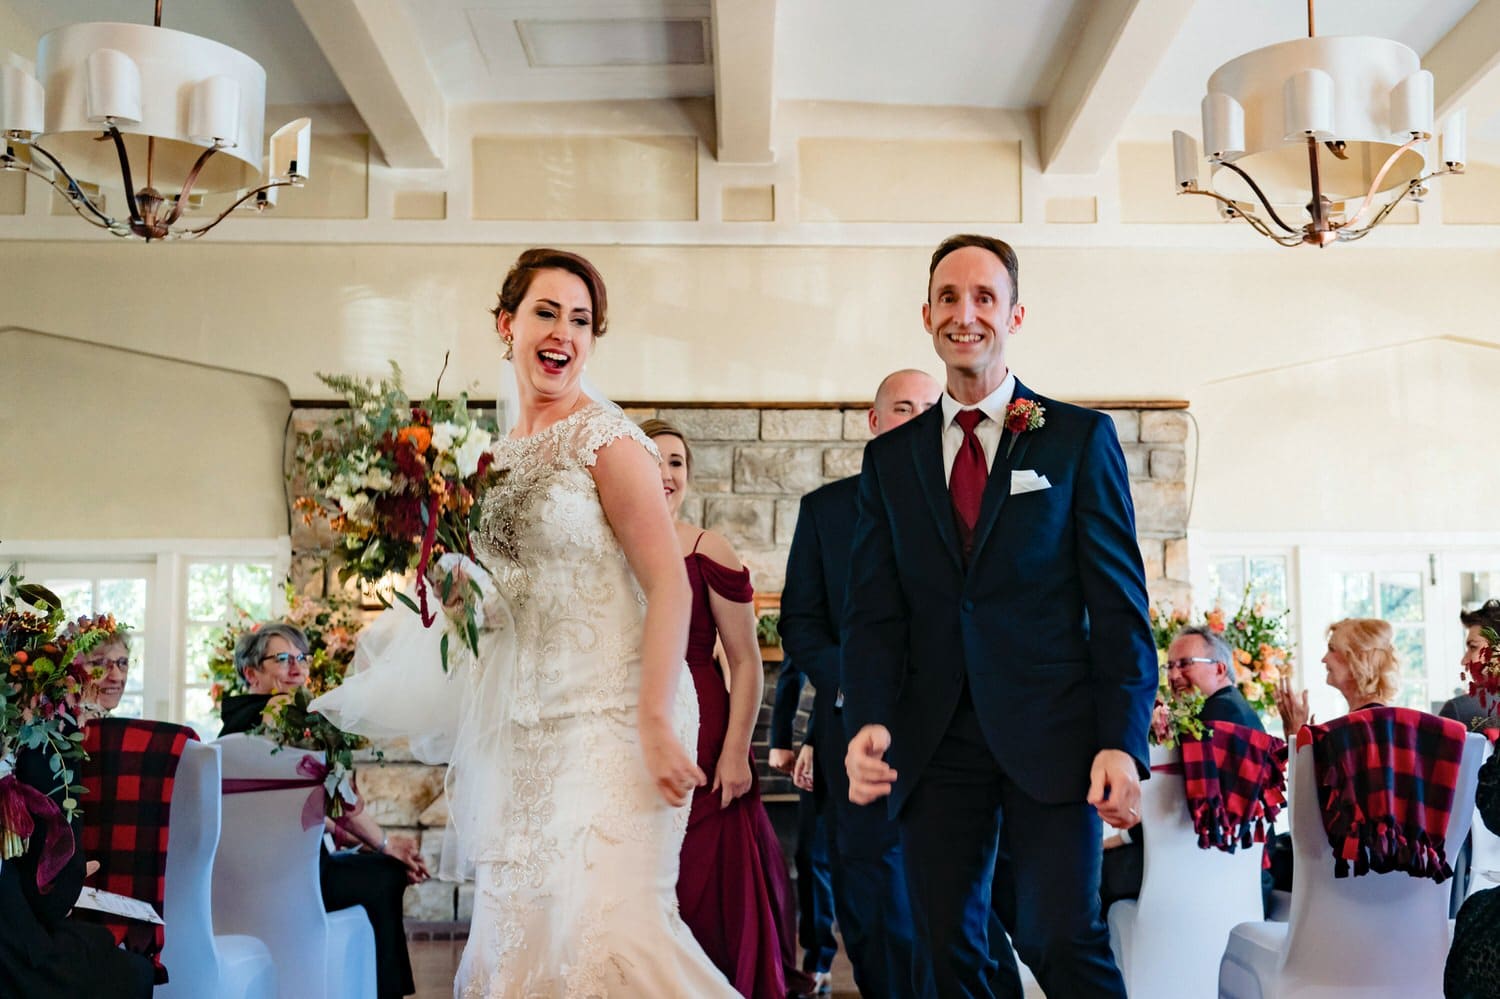 A colorful, candid picture of a bride and groom, bridesmaid and groomsman dancing down the aisle at the end of a wedding ceremony at The Elms. 